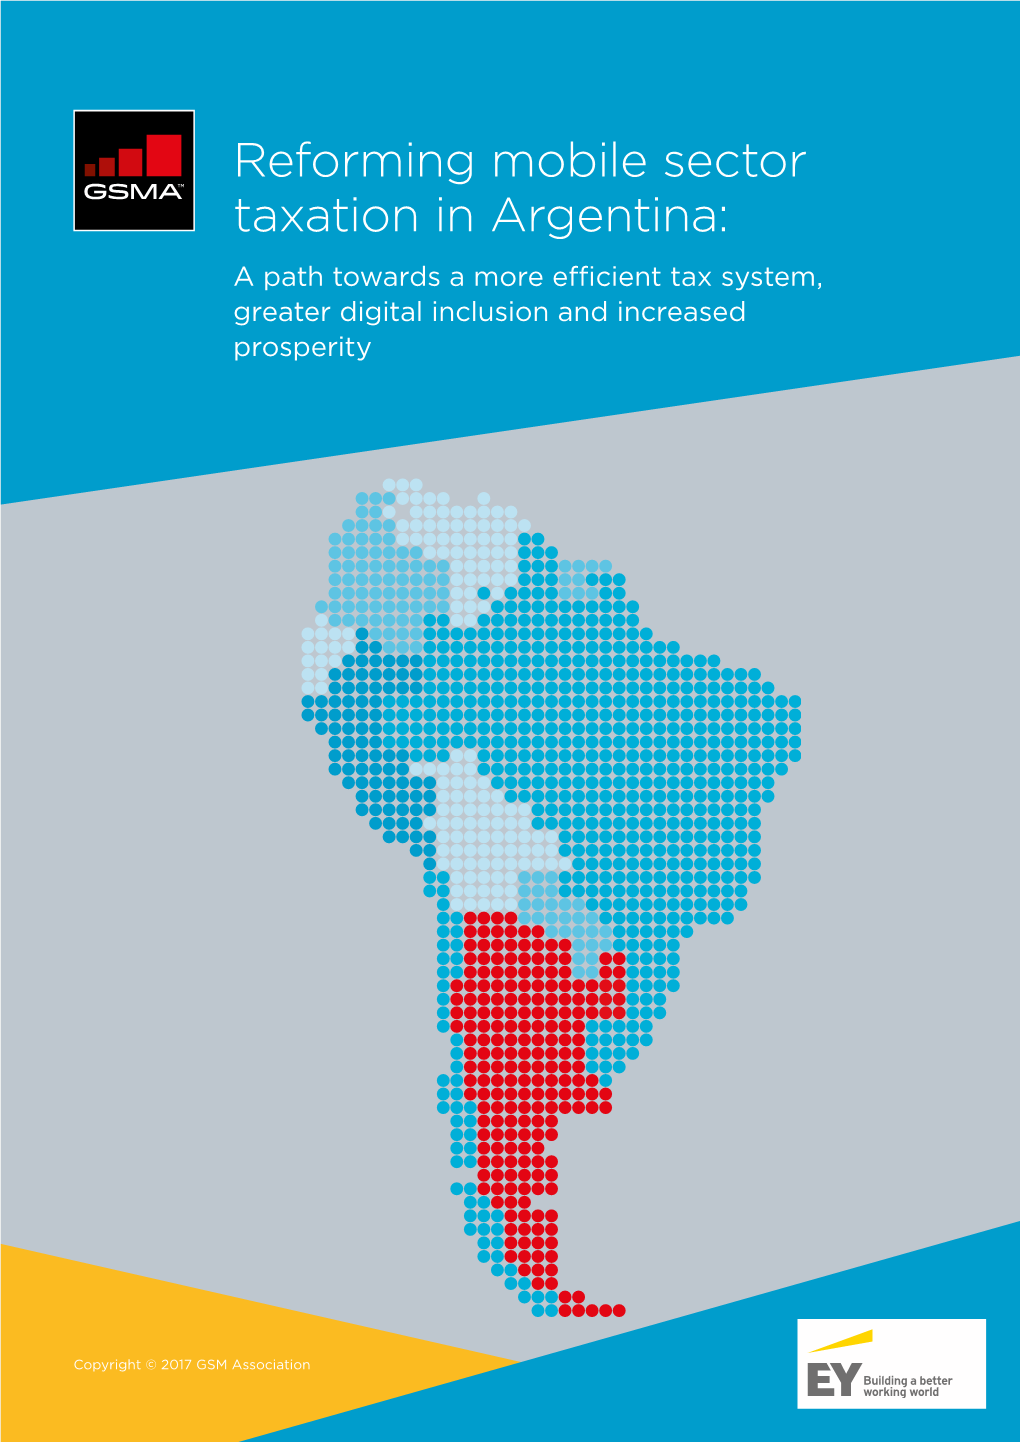 Reforming Mobile Sector Taxation in Argentina: a Path Towards a More Efficient Tax System, Greater Digital Inclusion and Increased Prosperity